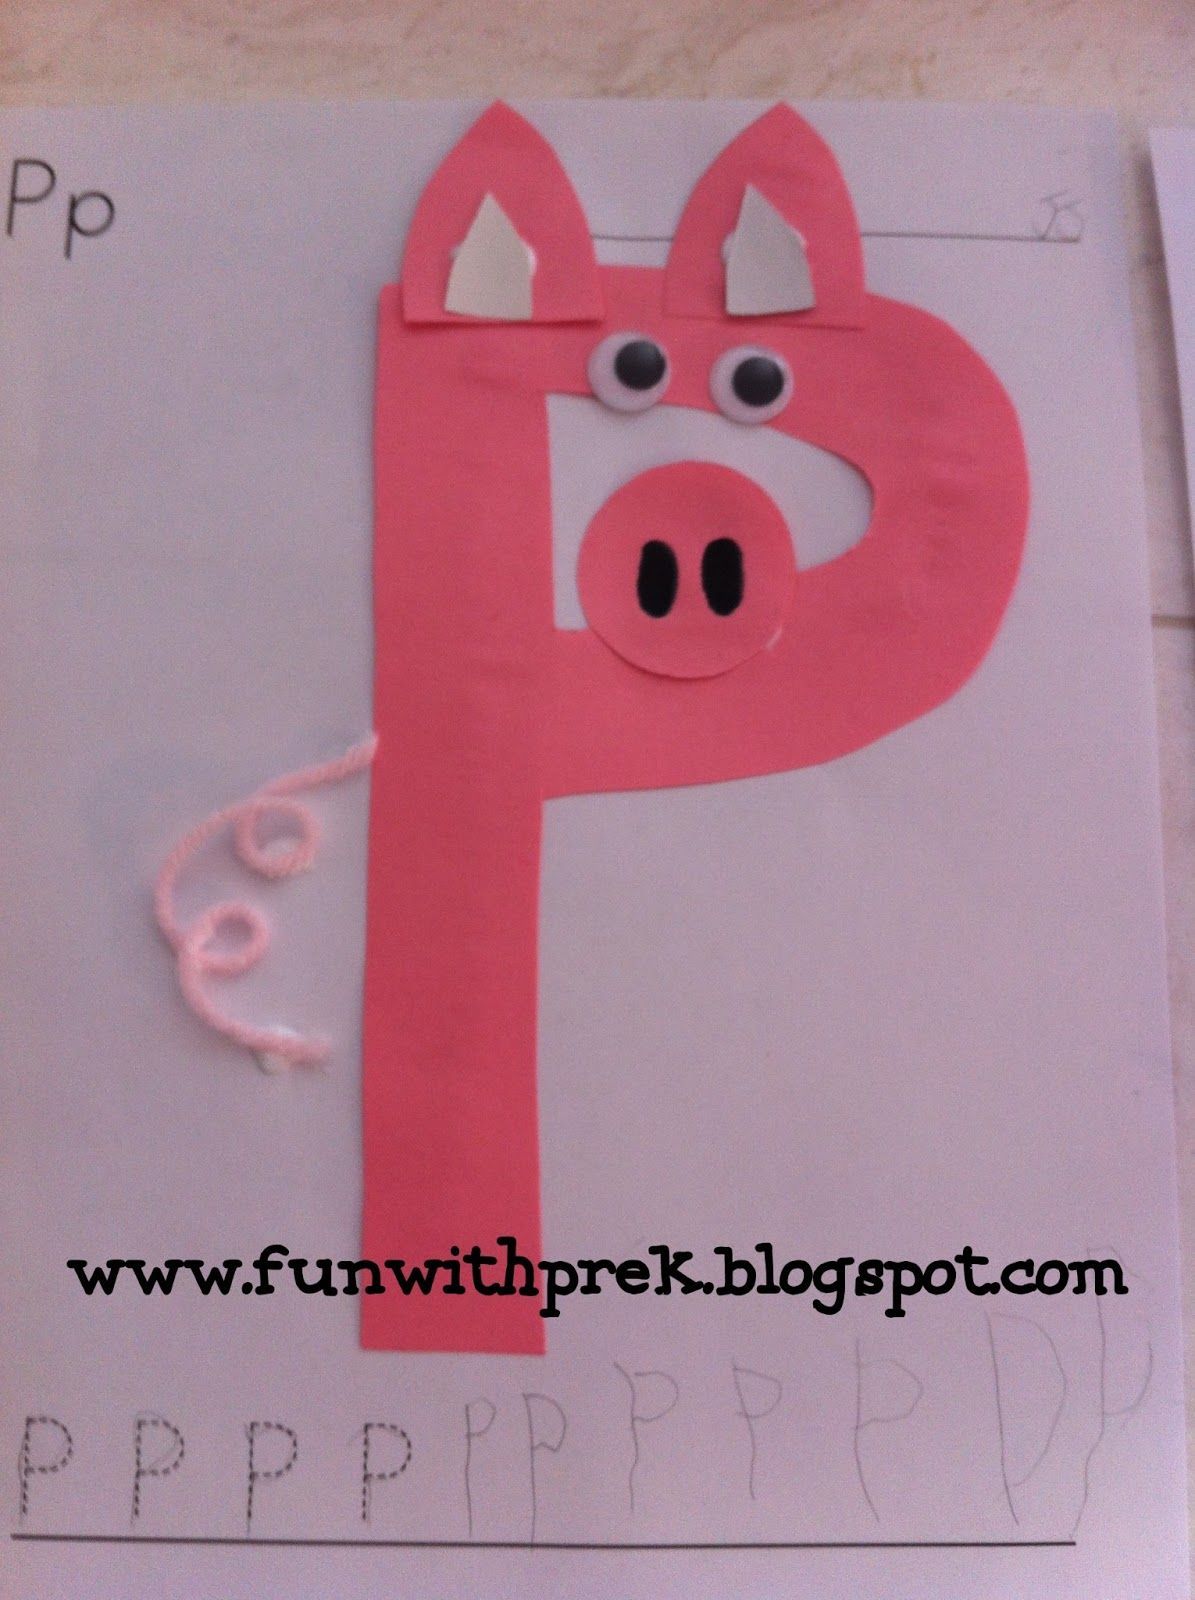 Cute preschool craft for P…P is for PIG and PINK!  That’s a pretty cute PIG!!